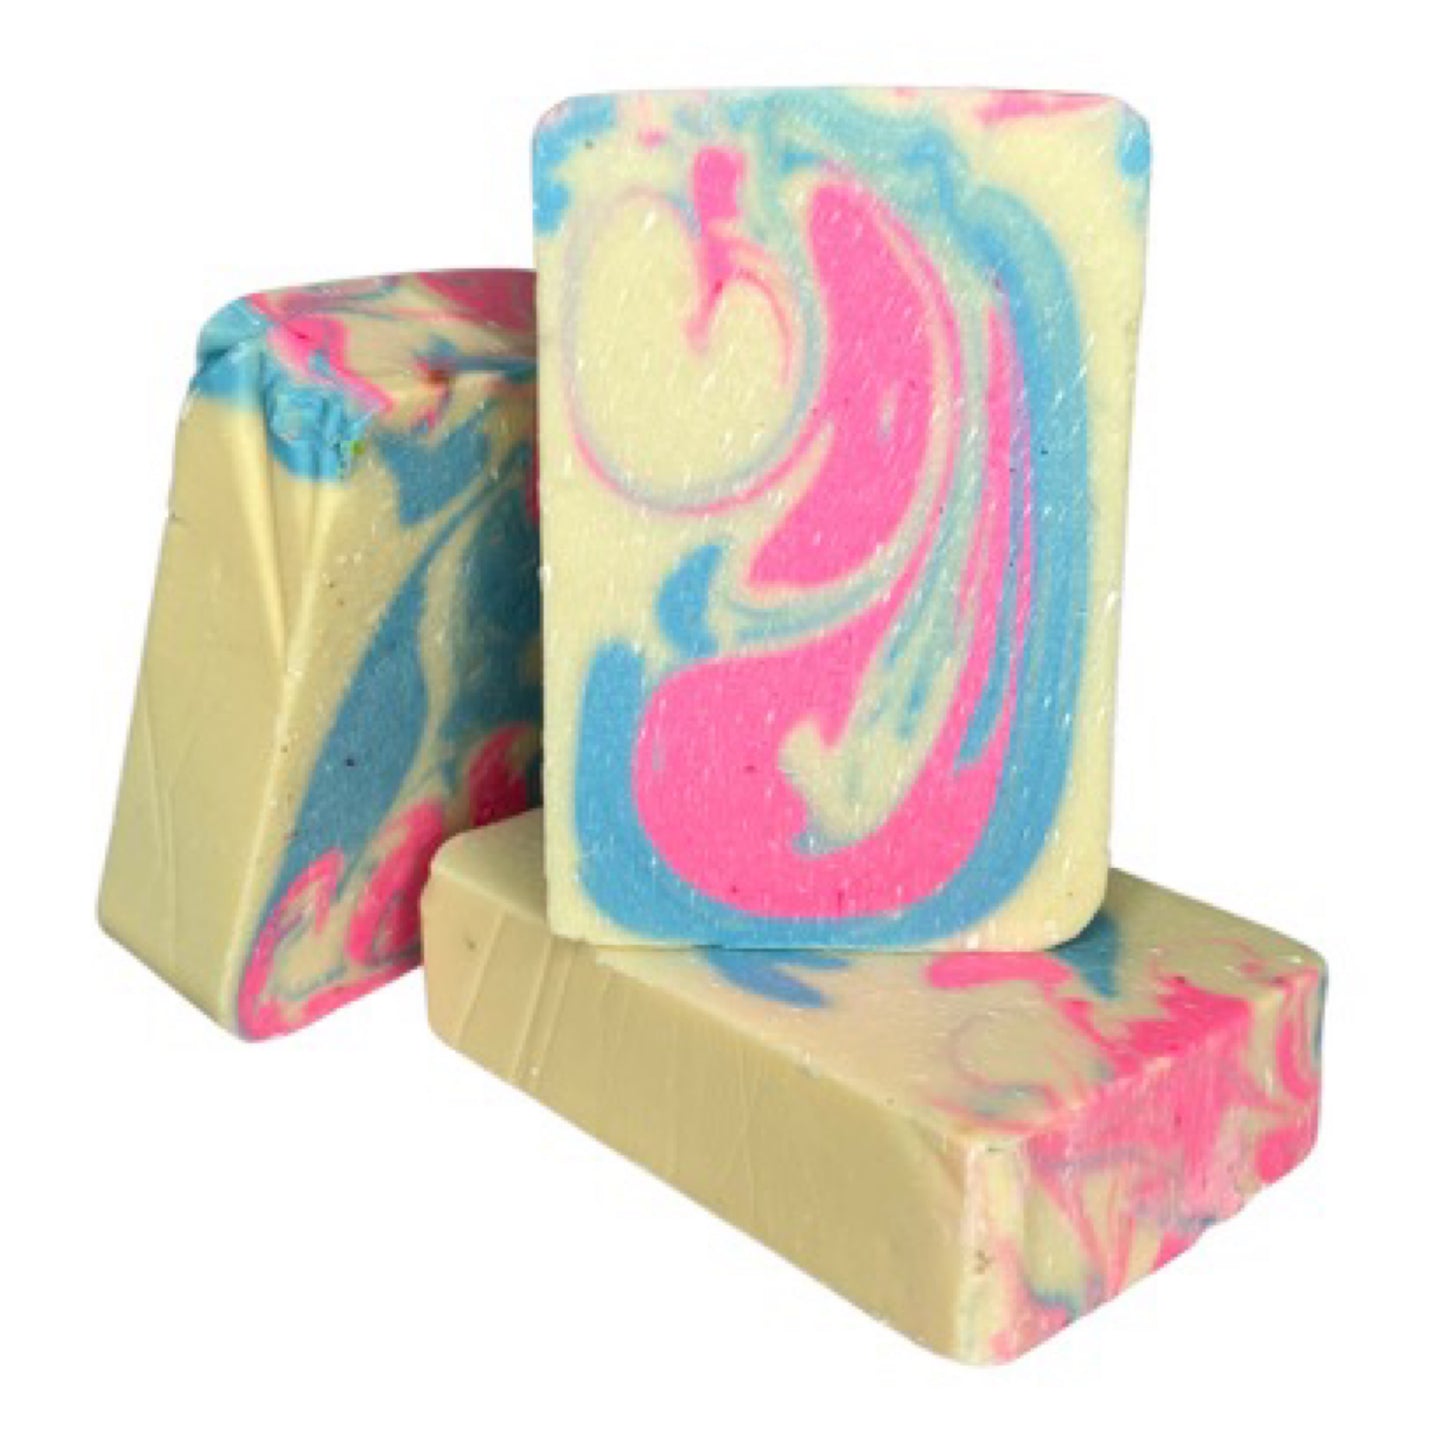 Cosmic Cotton Candy Soap Bar